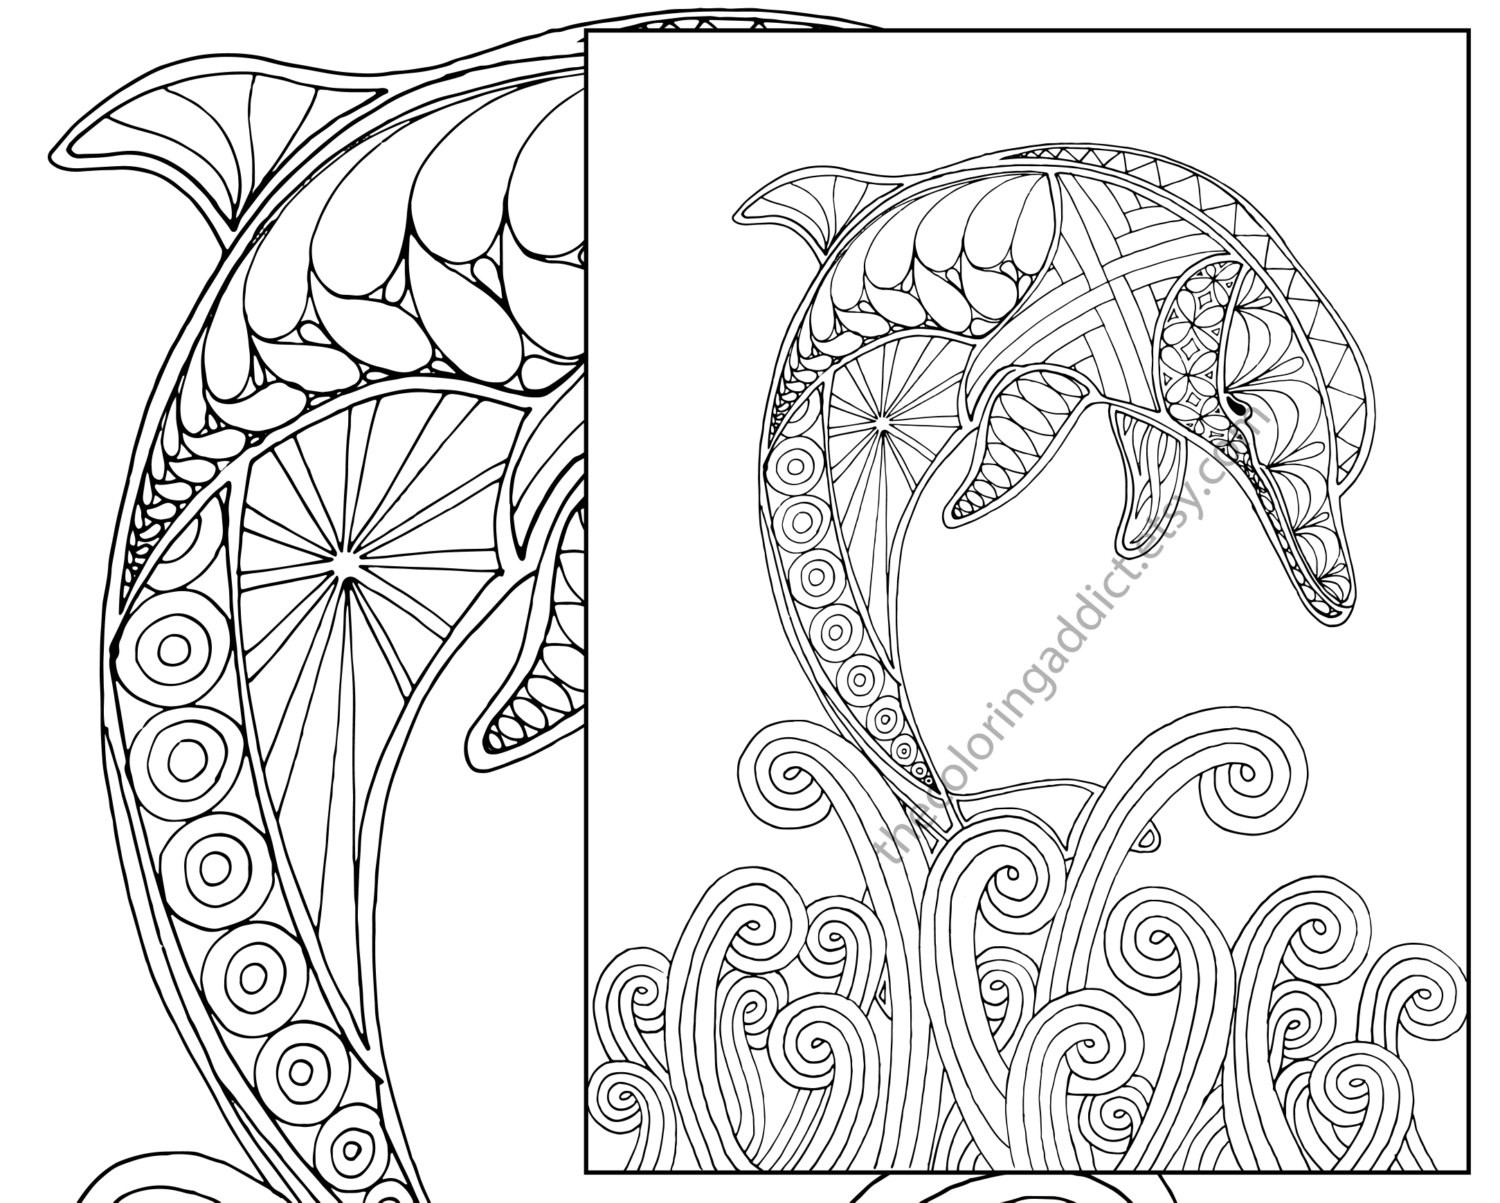 nautical-coloring-pages-print-at-getcolorings-free-printable-colorings-pages-to-print-and